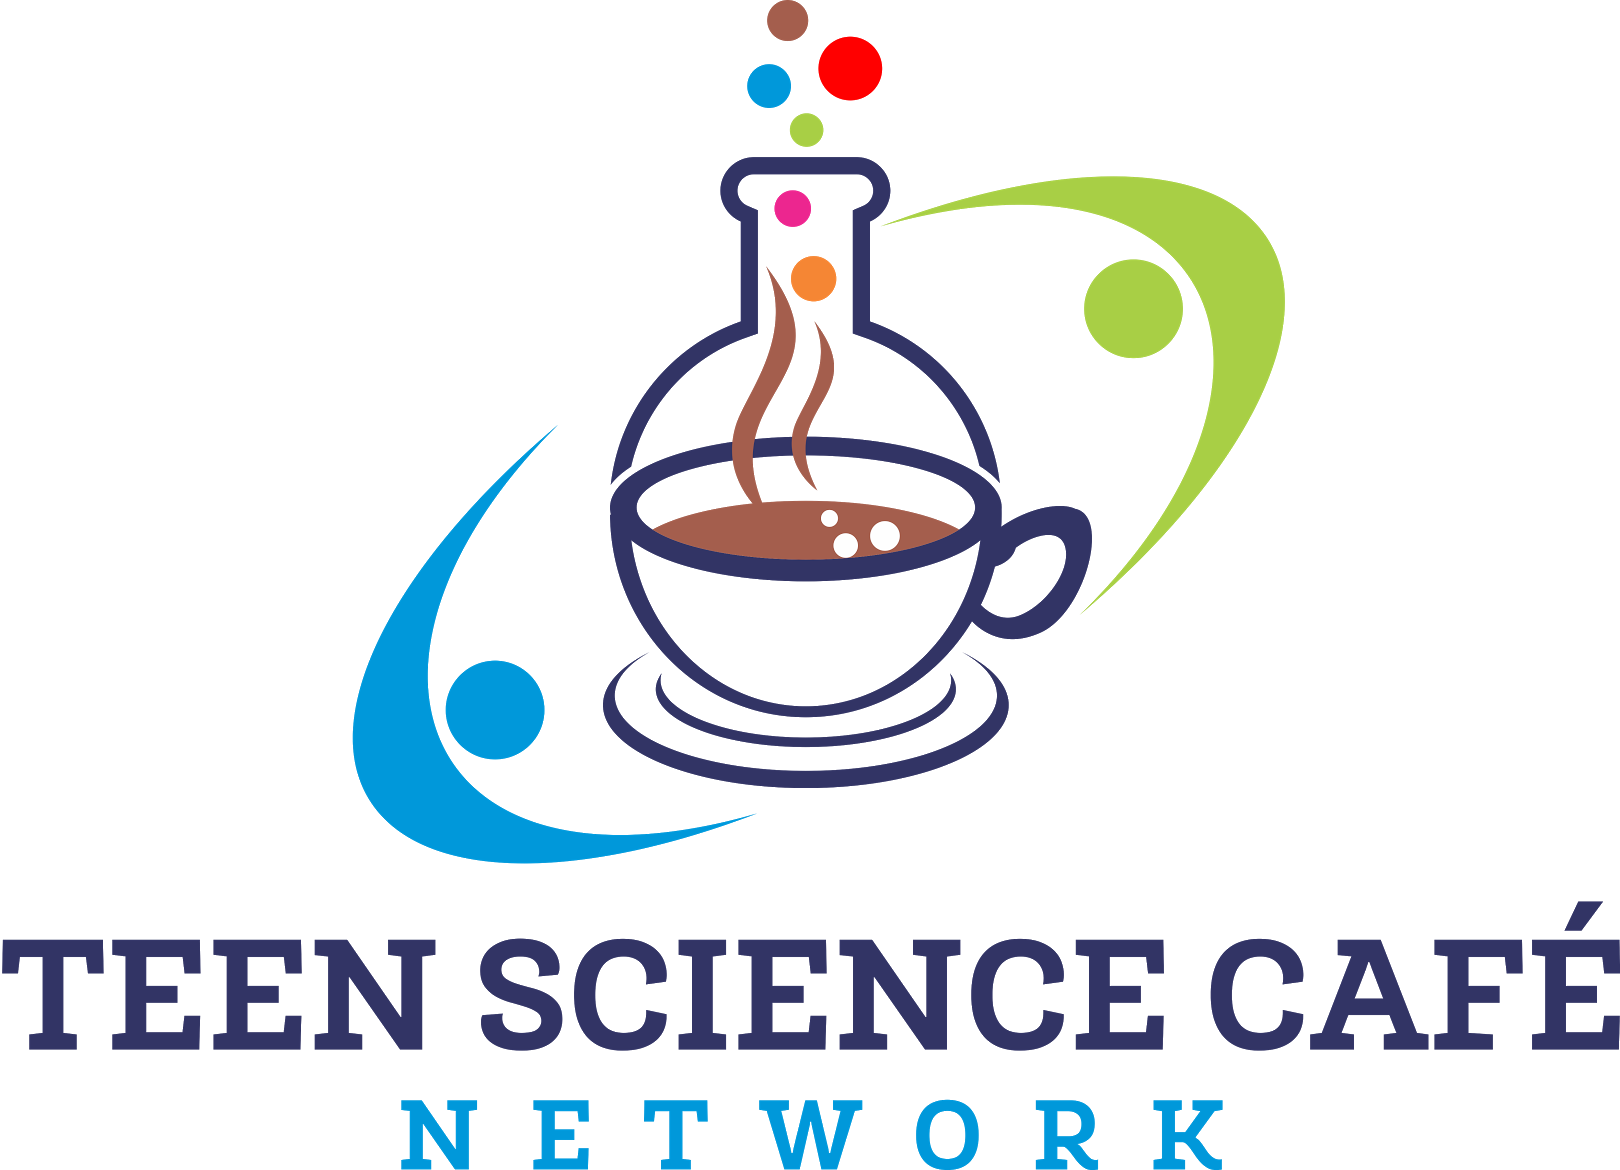 Teen Science Cafe Network